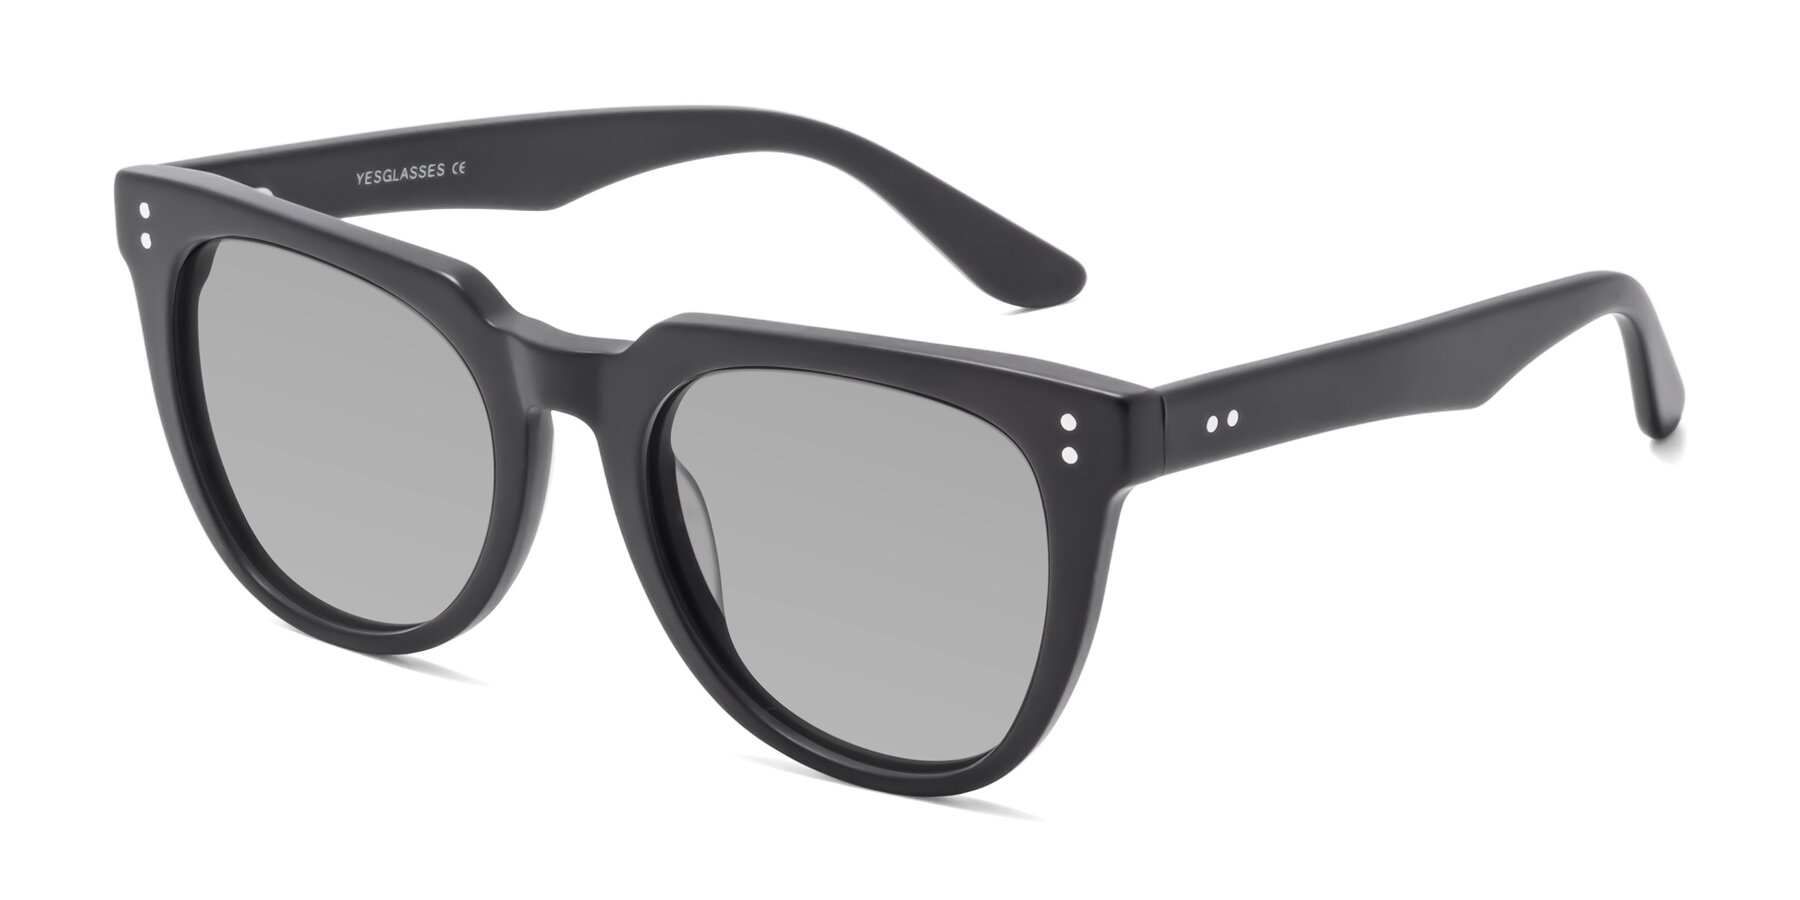 Angle of Graceful in Matte Black with Light Gray Tinted Lenses